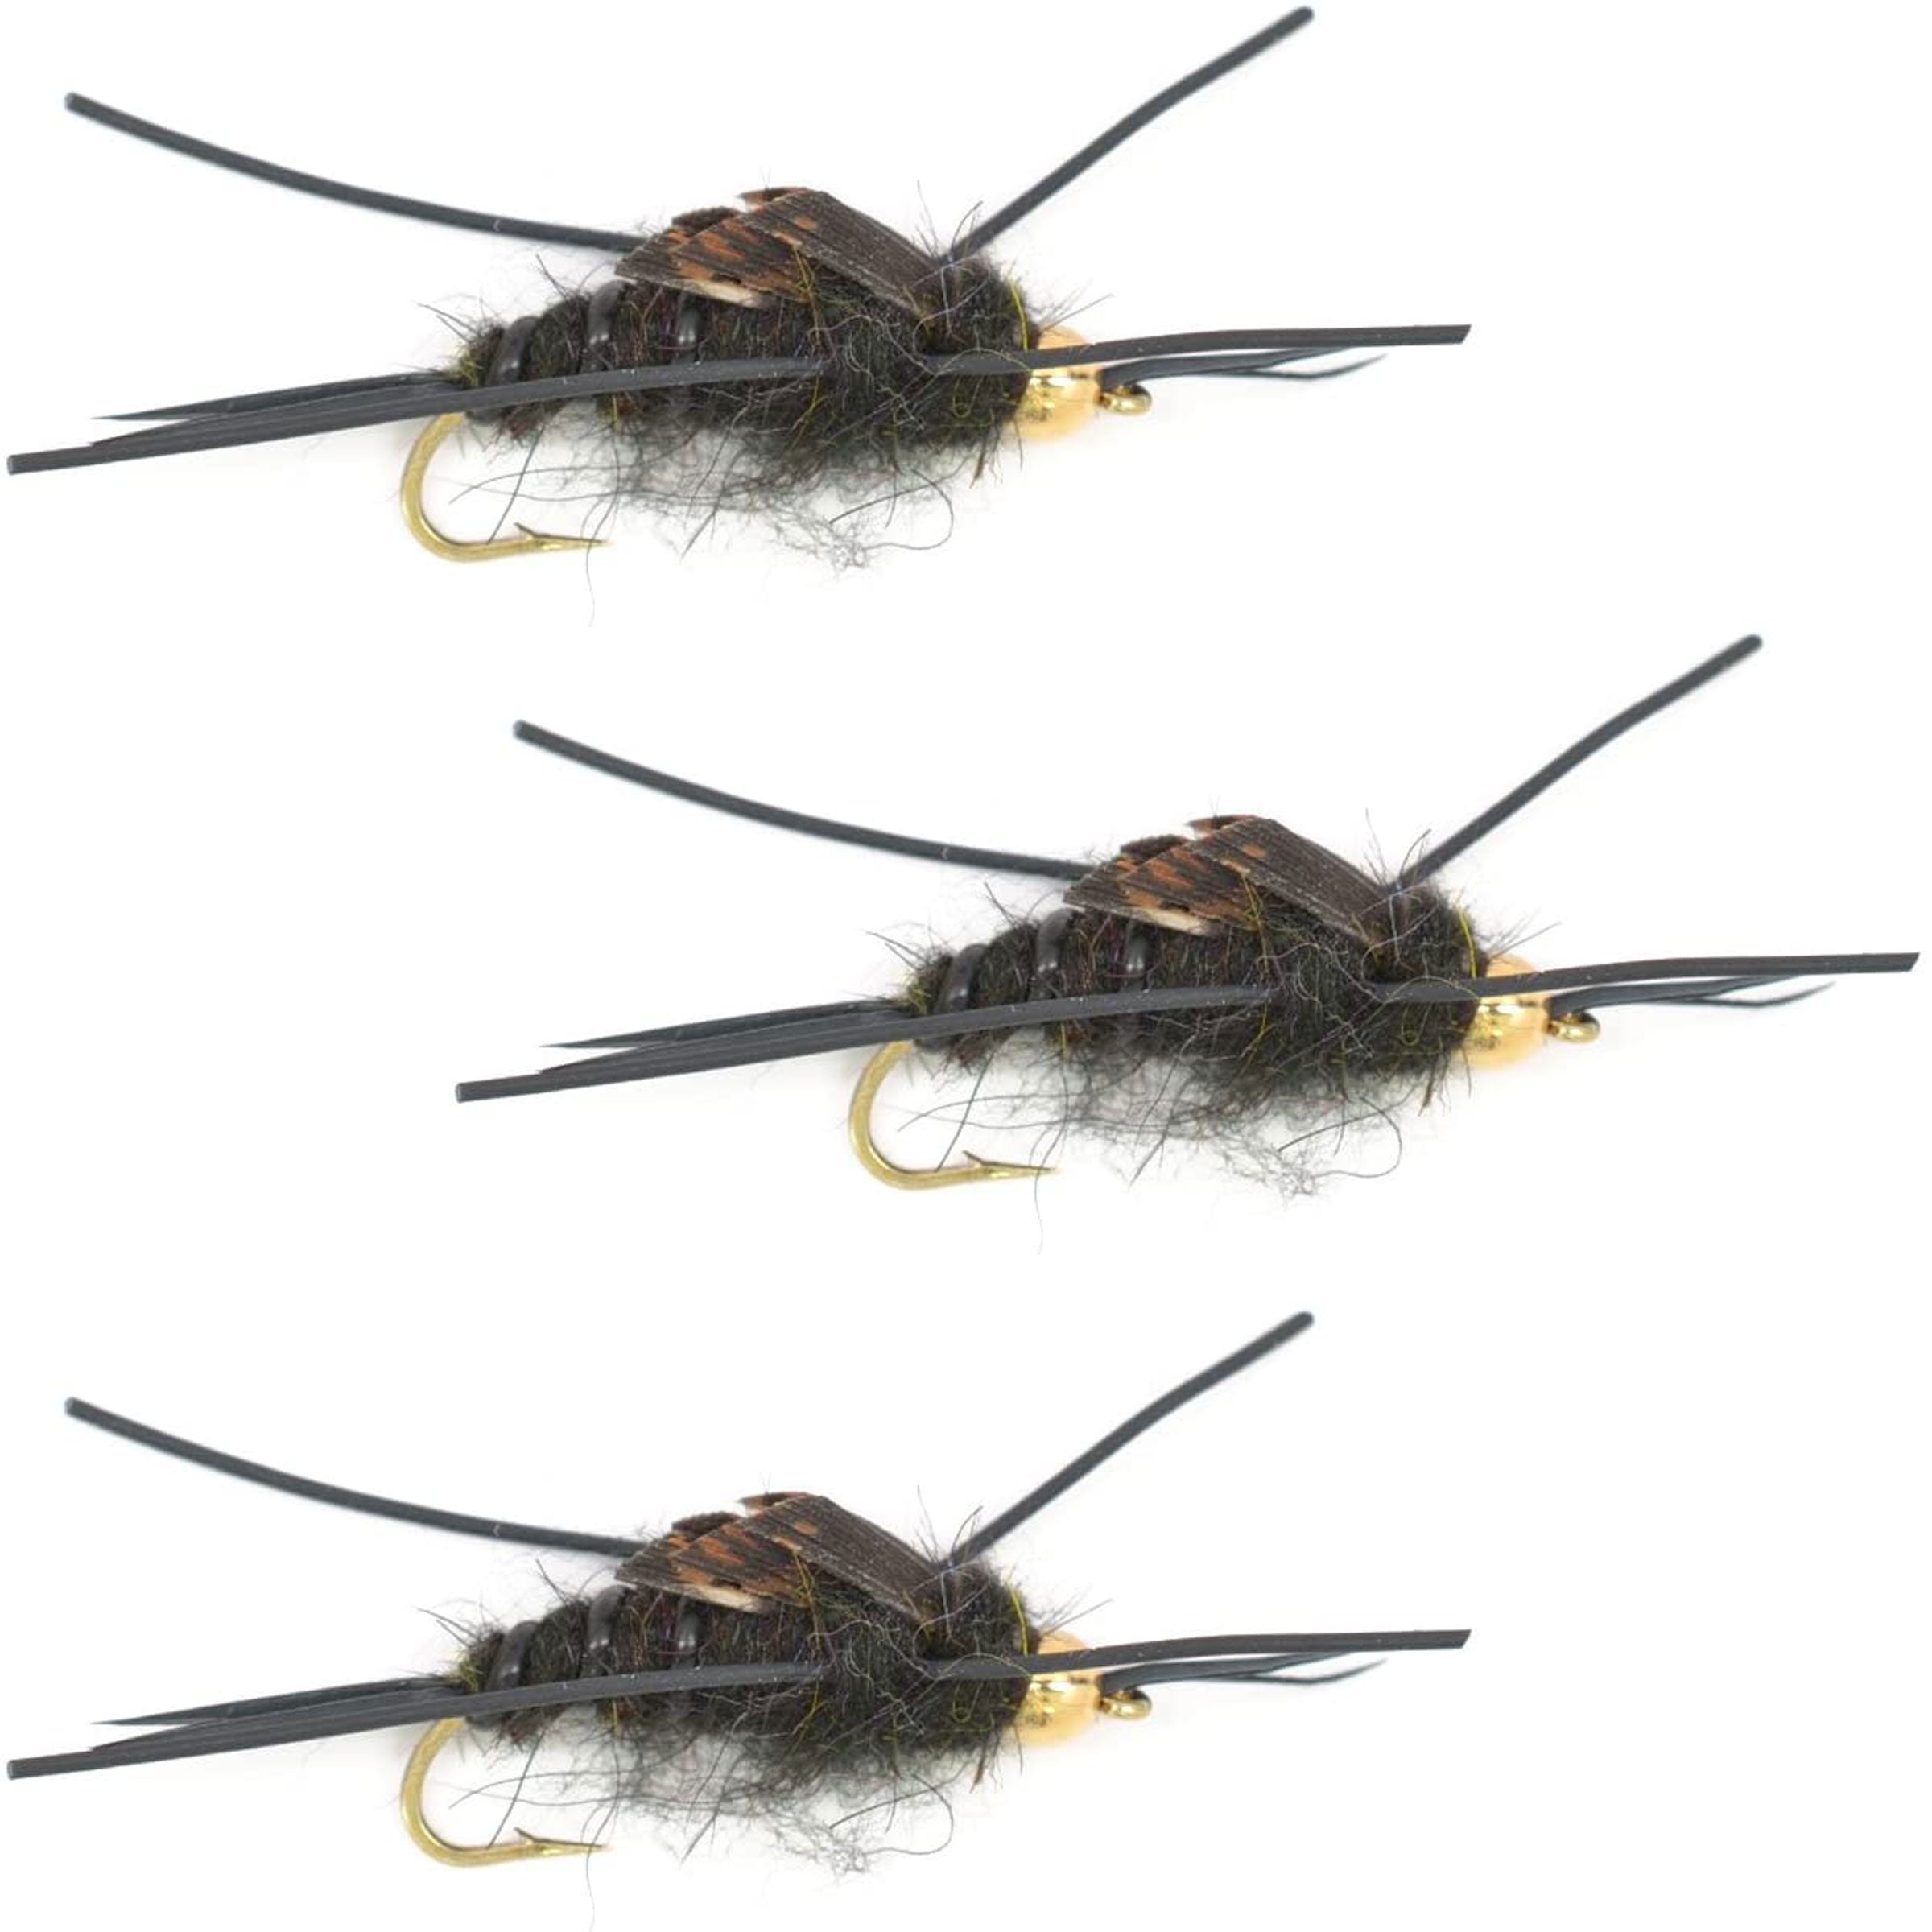 3 Pack Gold Bead Kaufmann's Black Stone Fly with Rubber Legs - Stonefly Wet Fly - Hook Size 8